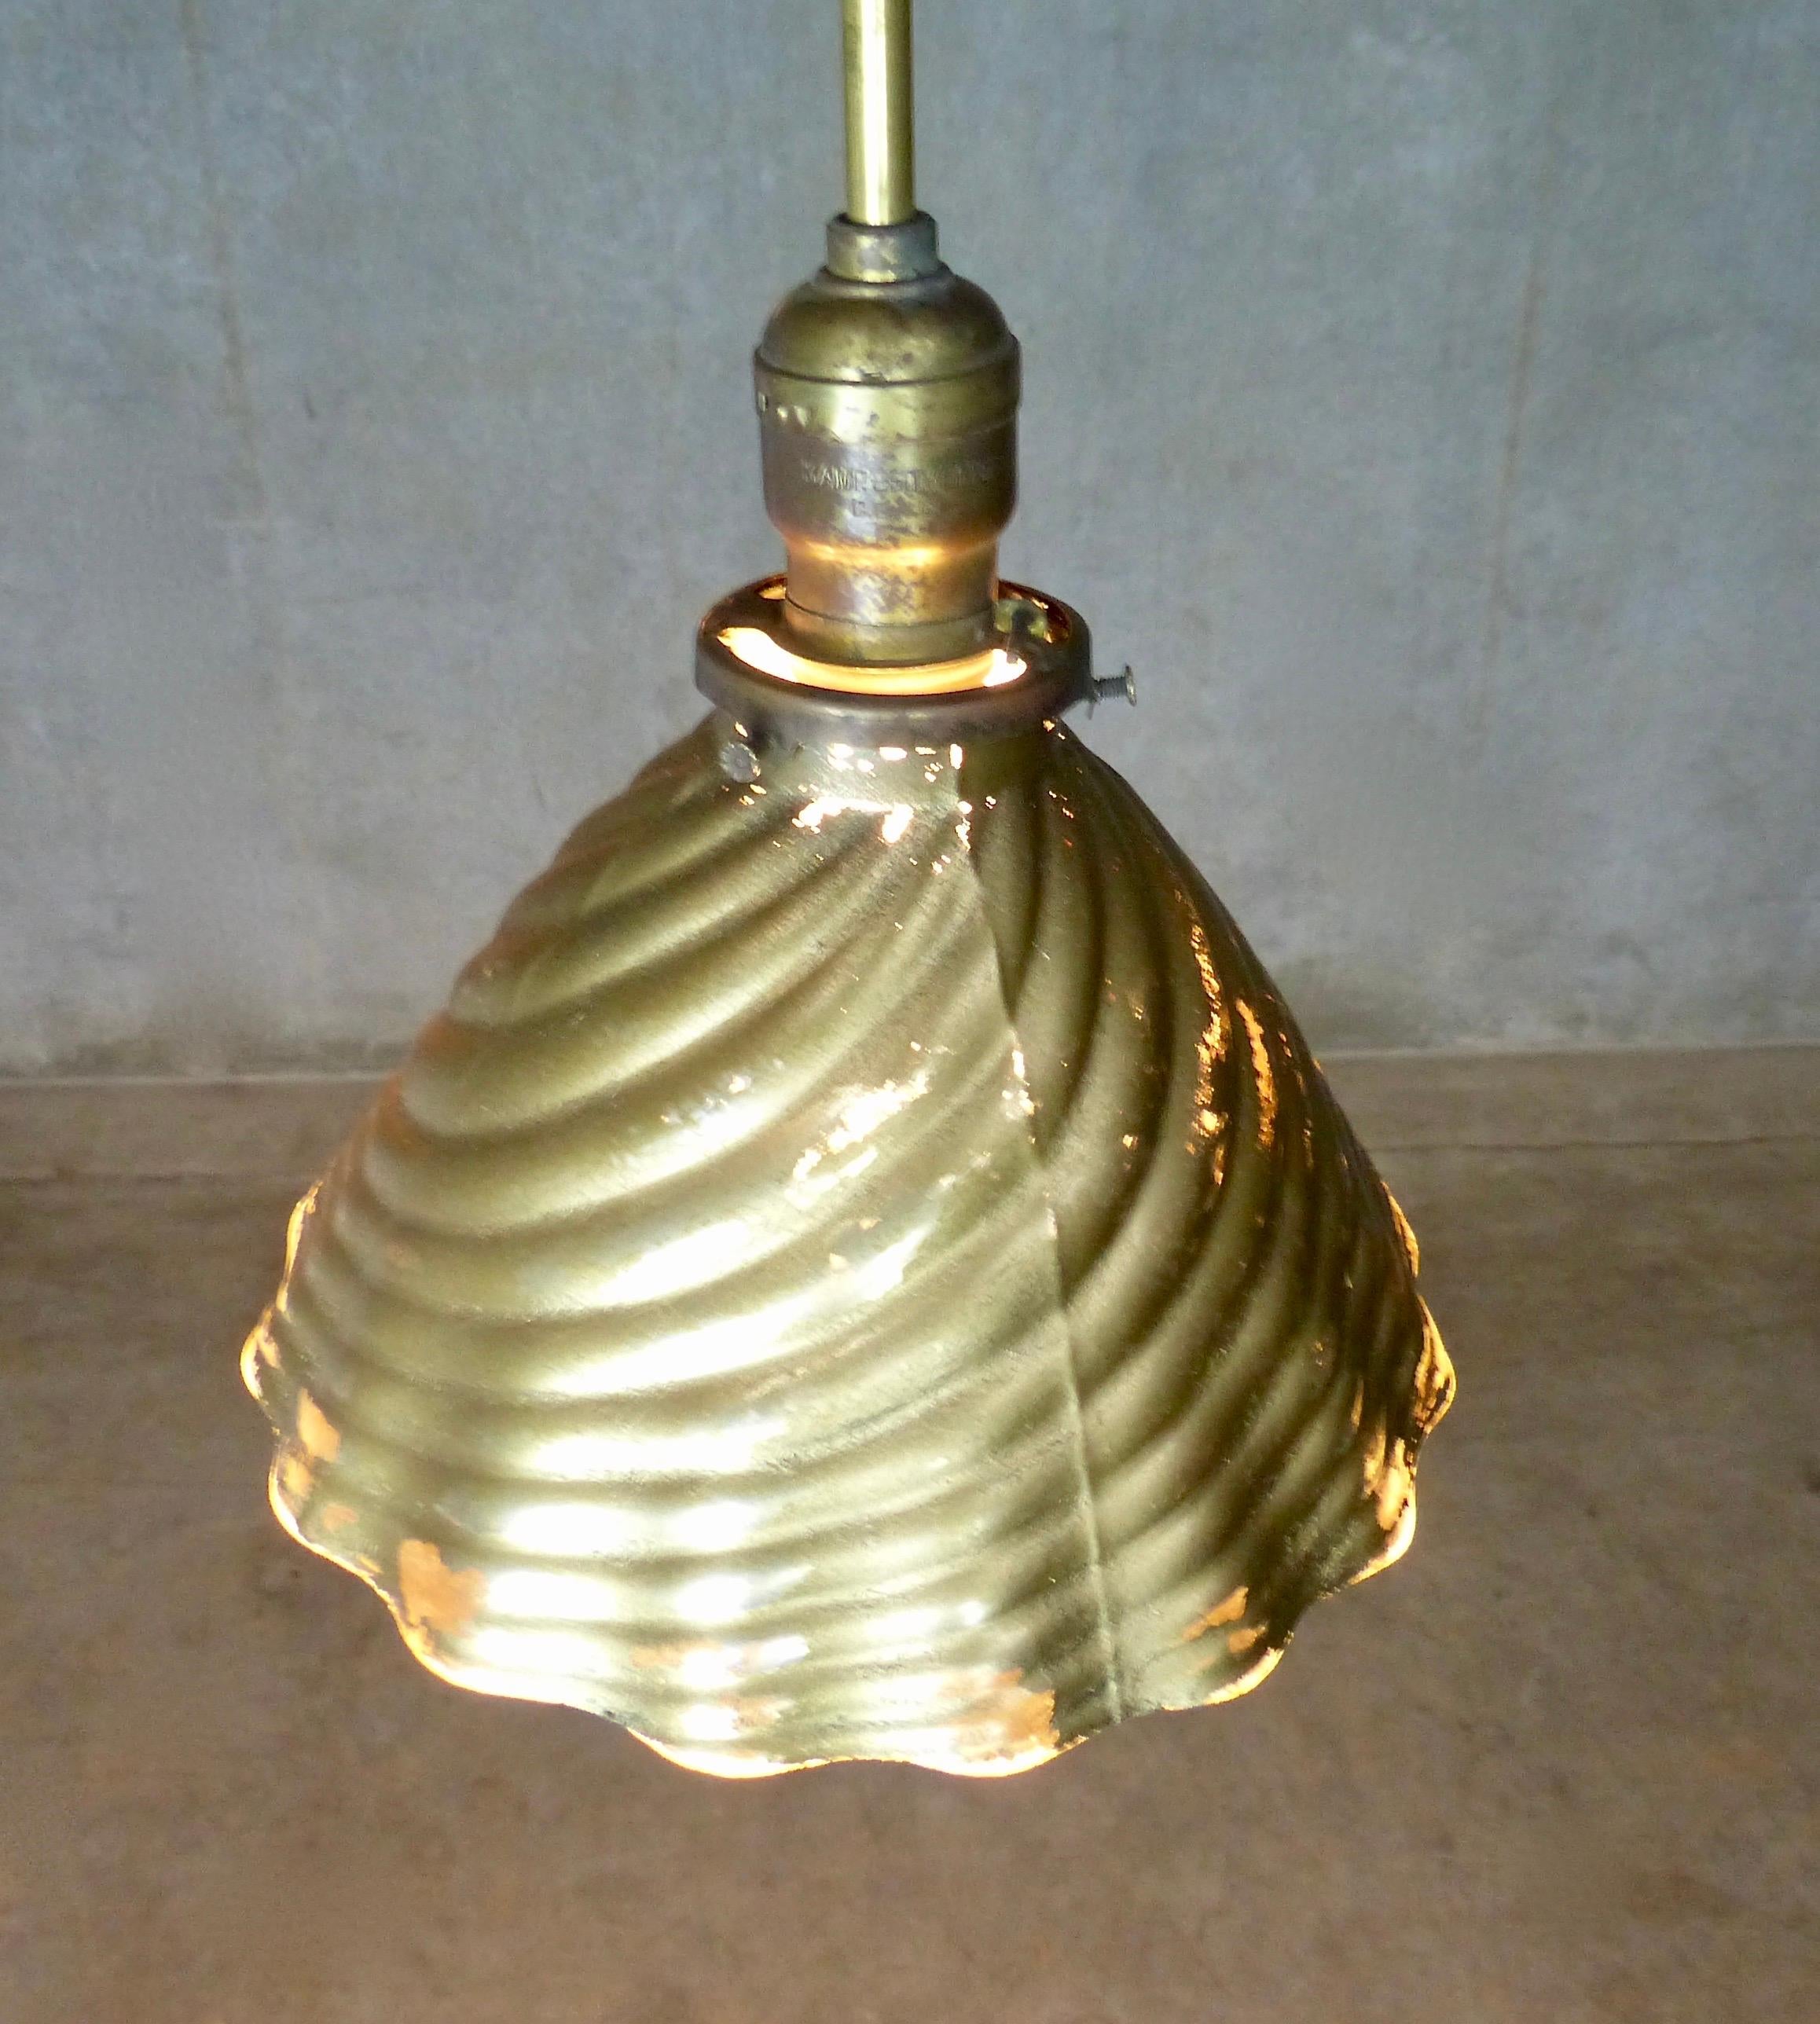 Matched pair of mercury/X-ray pendant lights from circa 1930. Deeply grooved surface texture with largely intact gold-tone exterior and silver/mercury interior. Re-wired and CSA approved to current electric standards; ceiling mounting plates